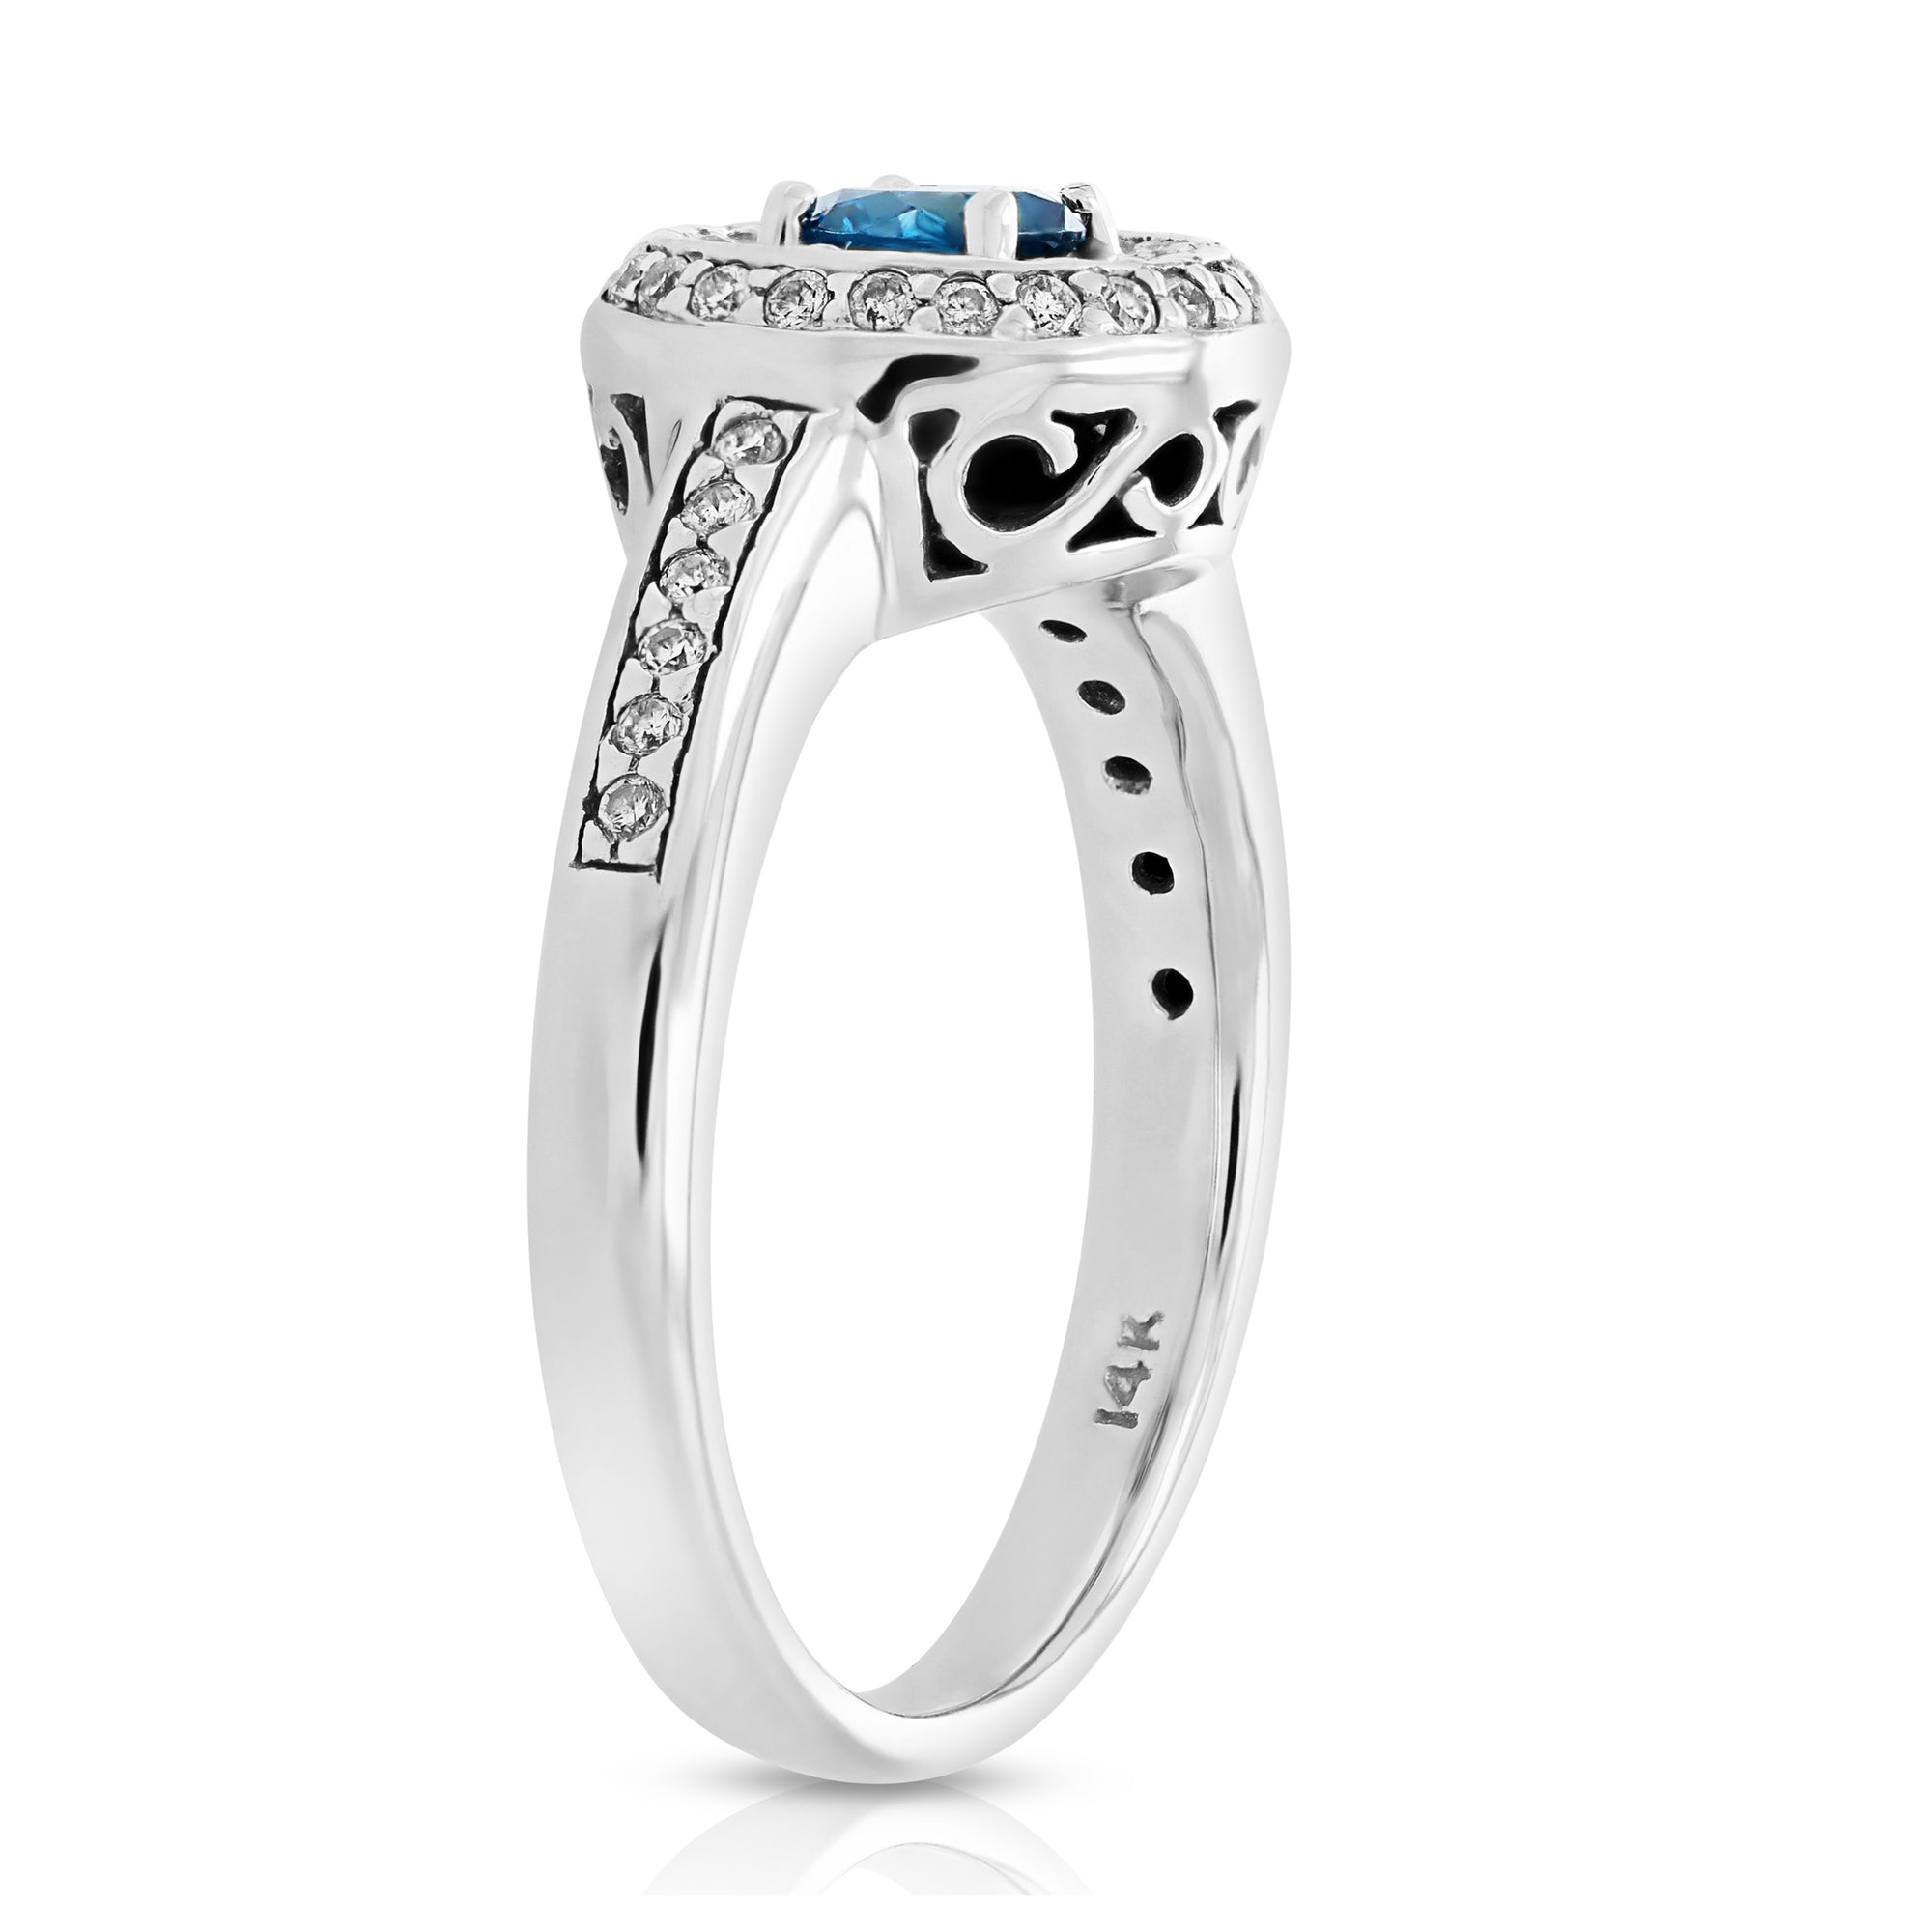 3/4 cttw Blue and White Diamond Engagement Ring 14K White Gold Bridal Size 7